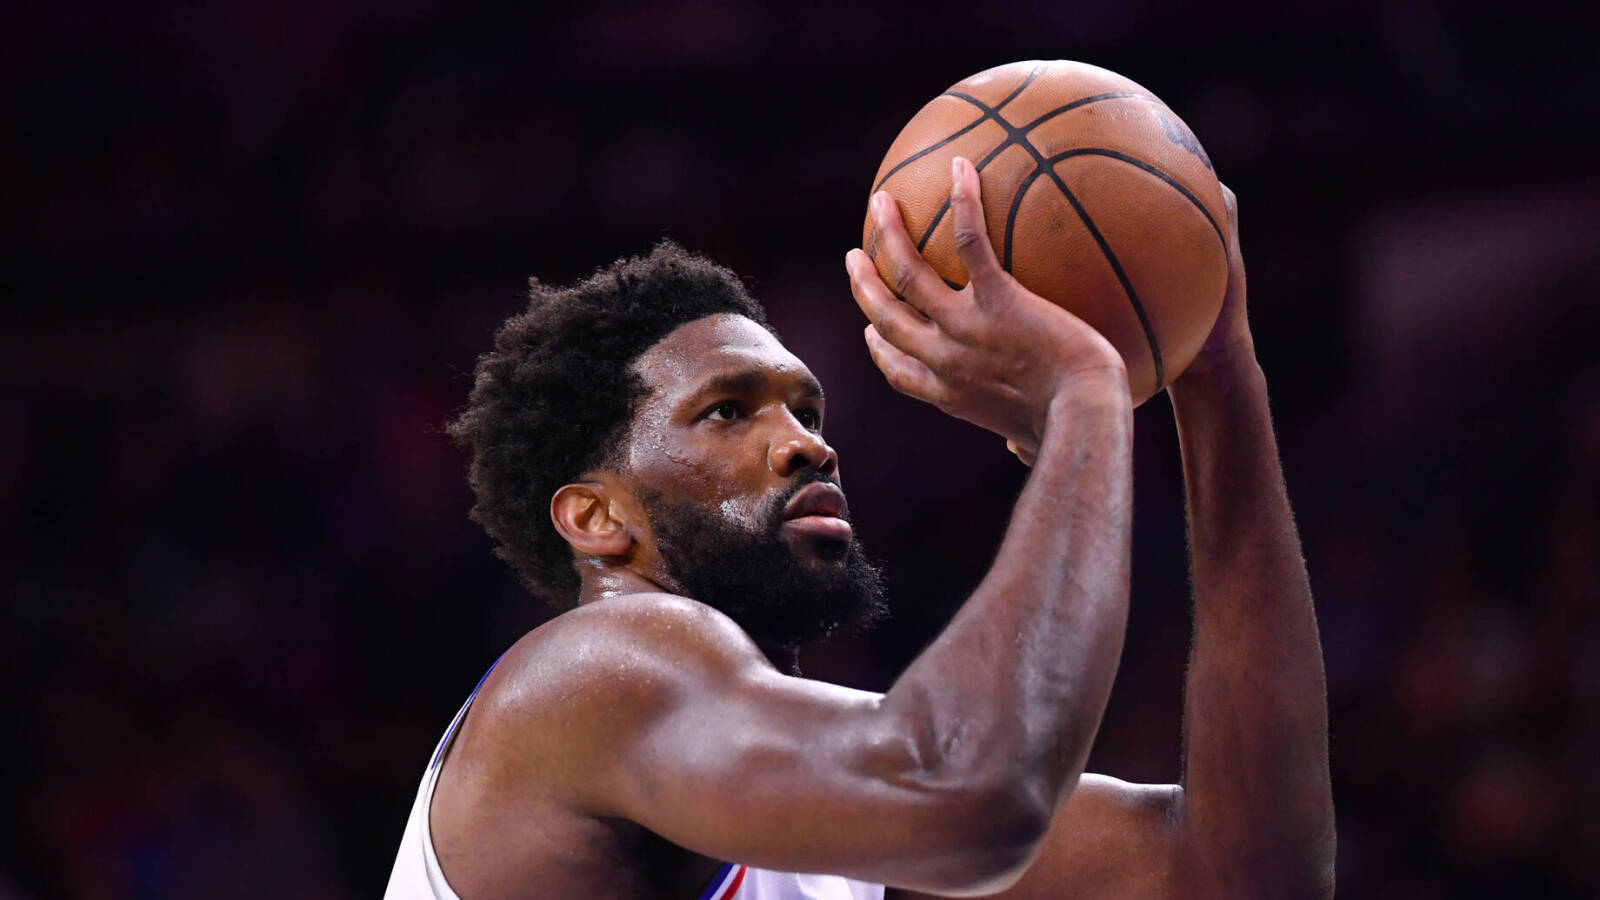 76ers center Joel Embiid reportedly playing through multiple injuries